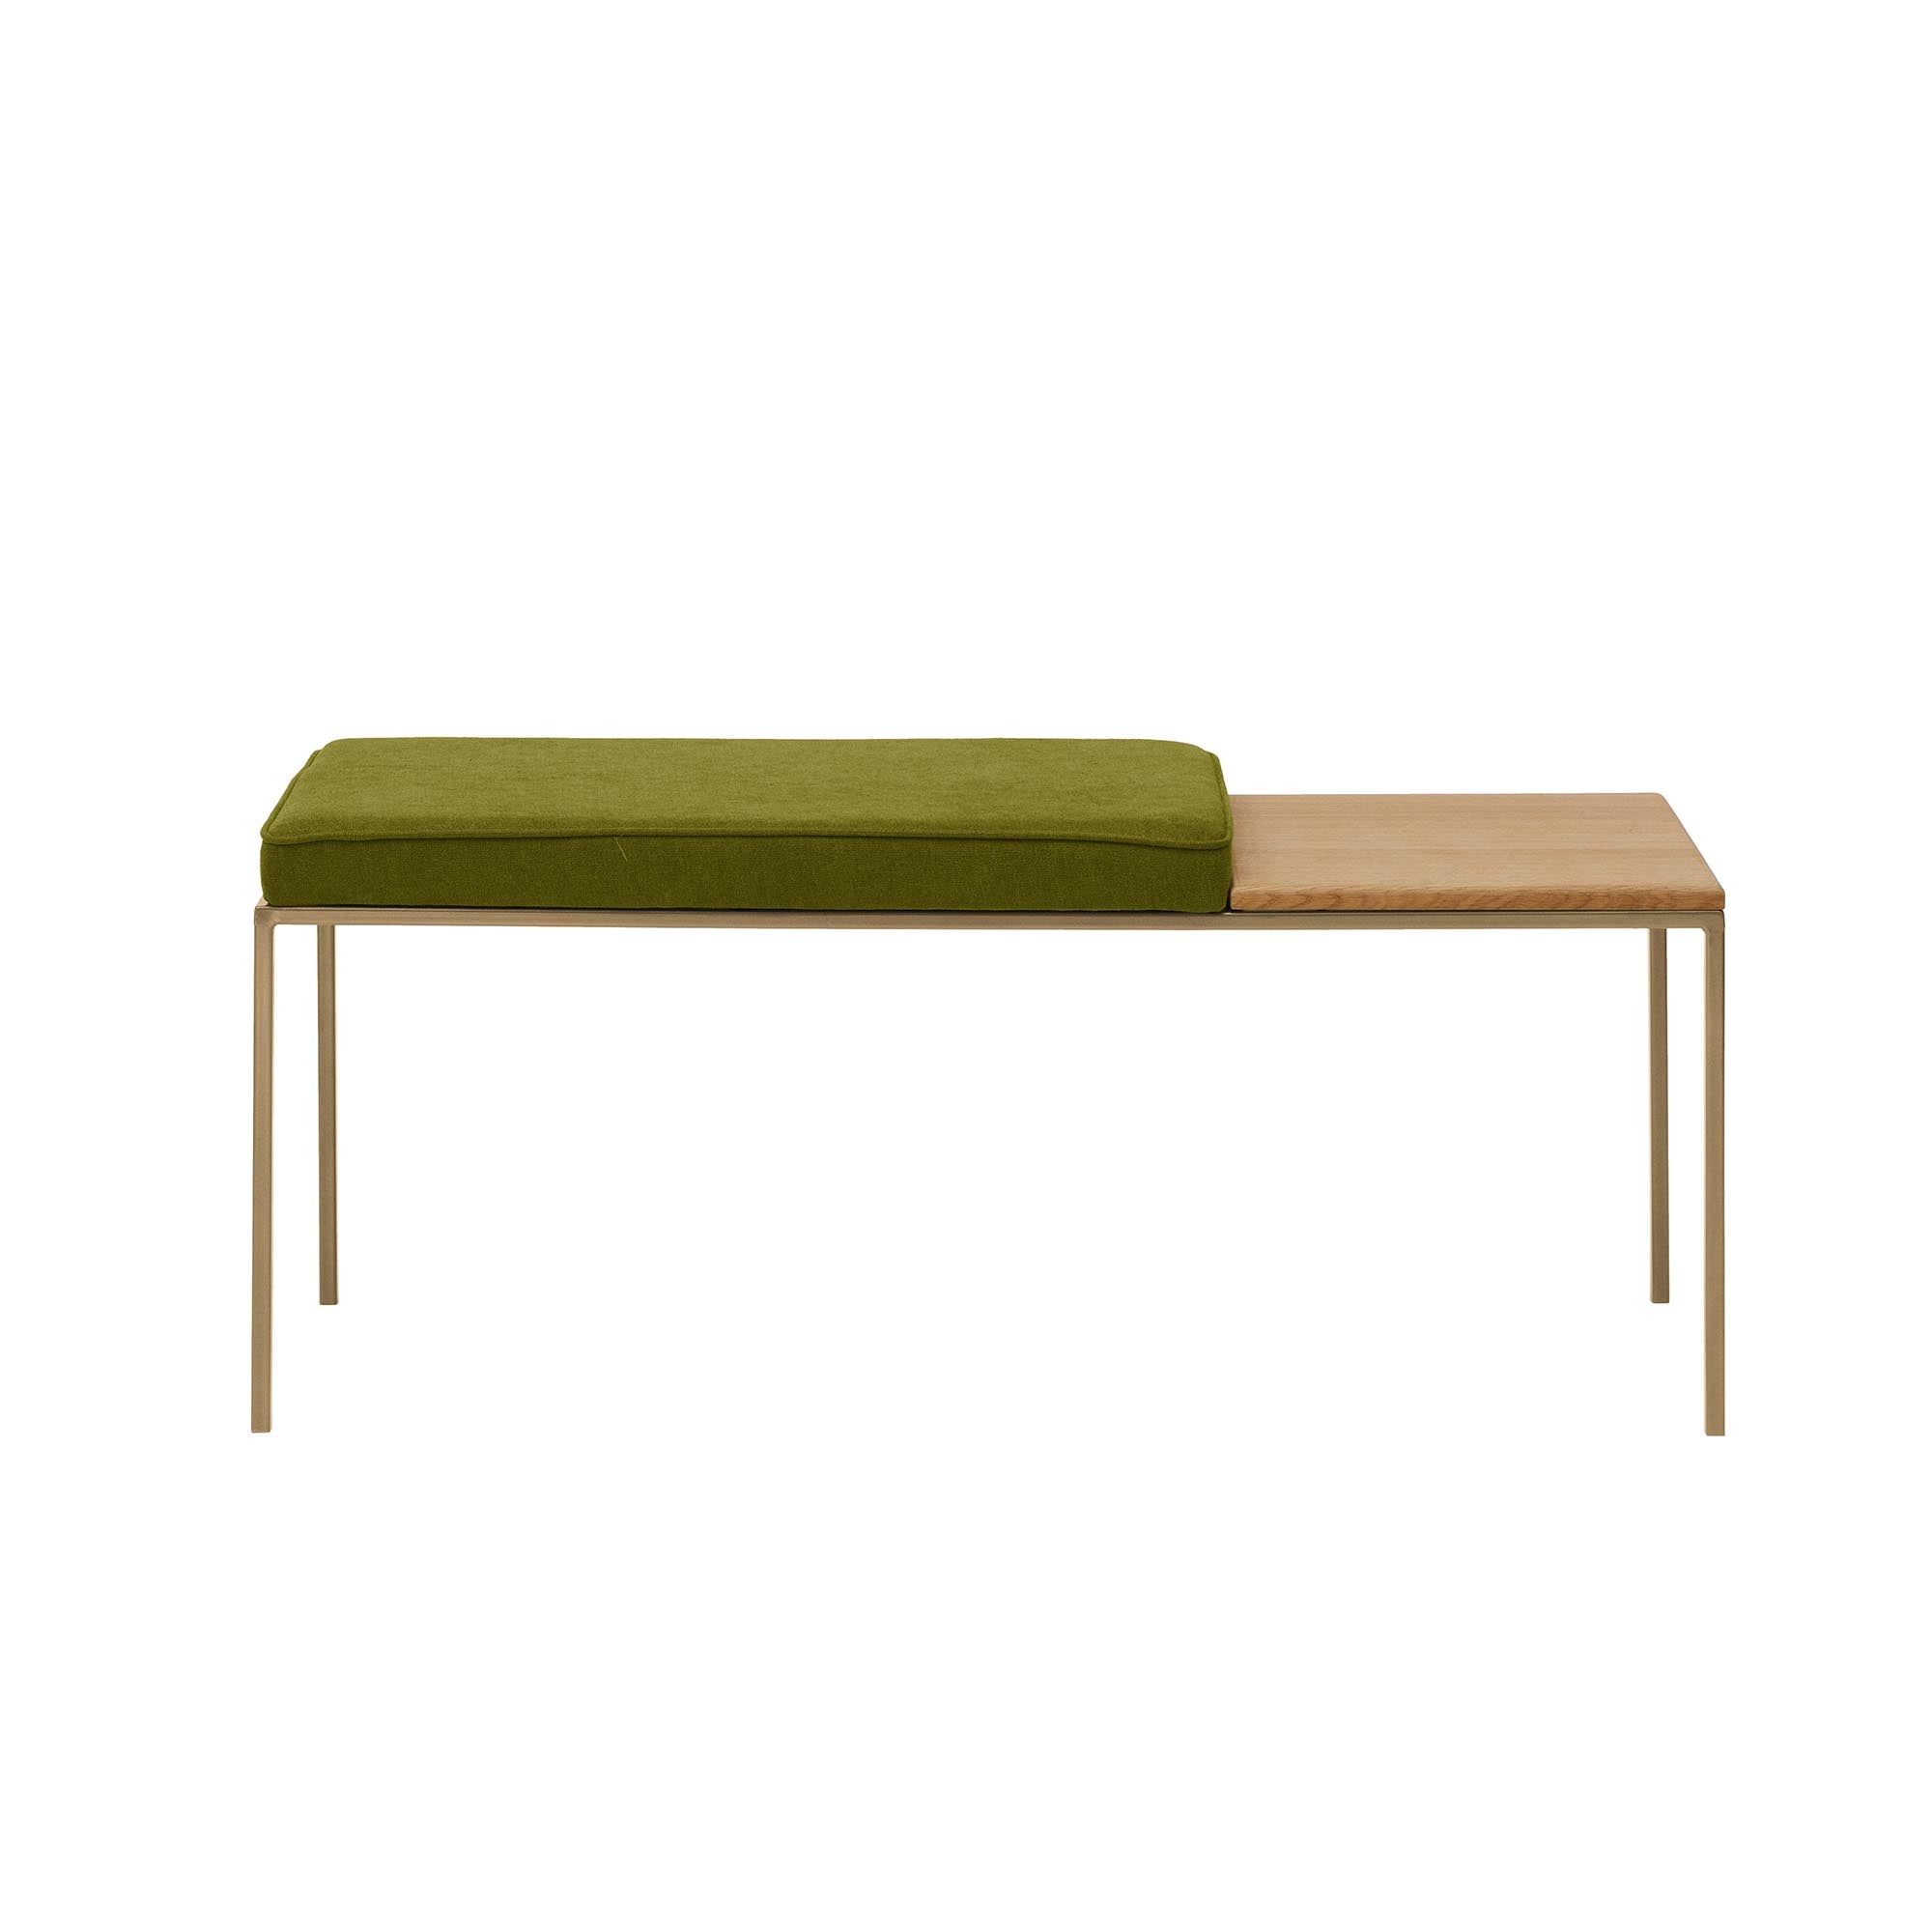 Oak Wood Seat, Natural Colour green fabric, yellow frame, front view